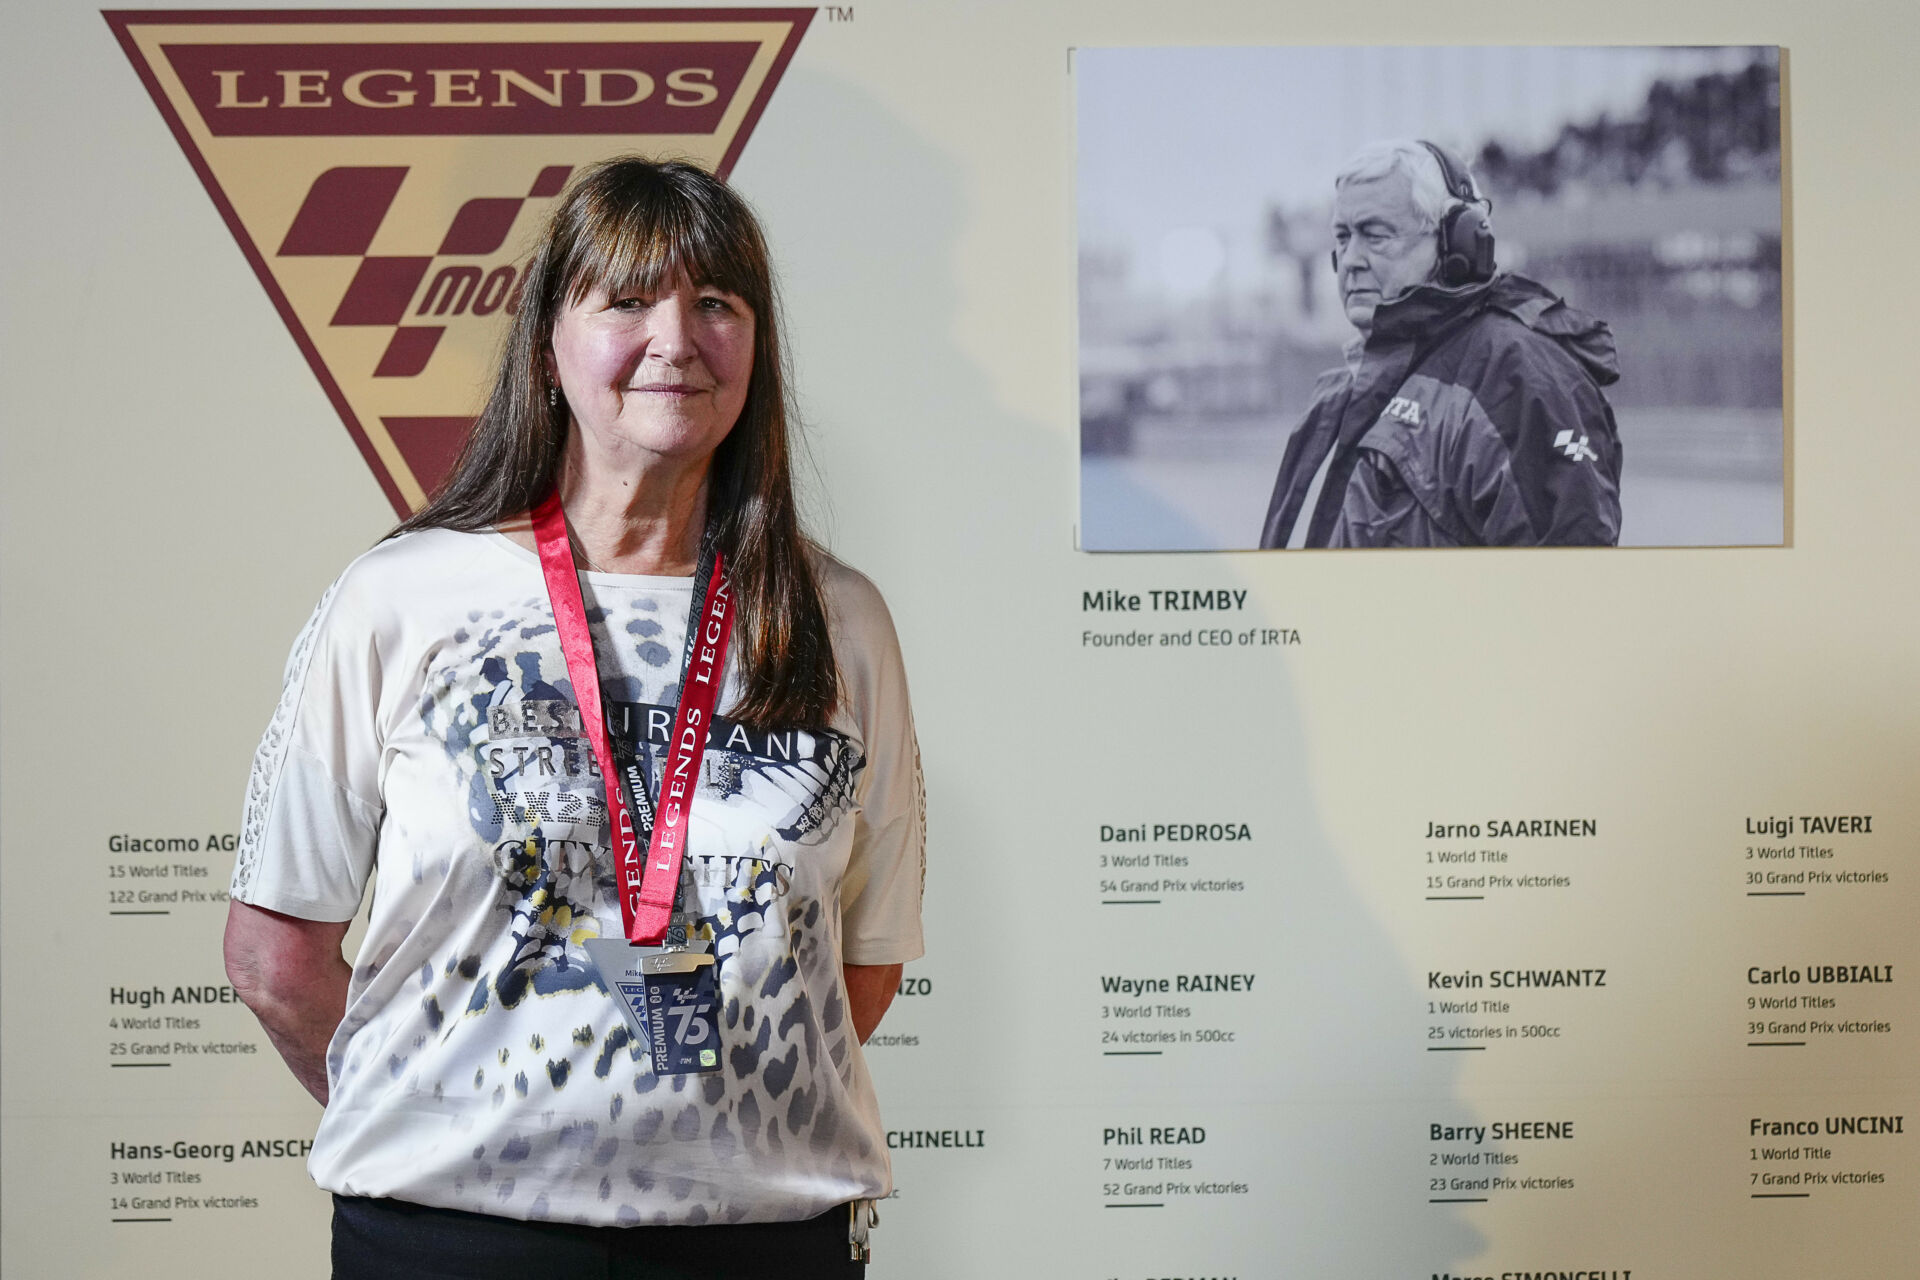 Irene Trimby, the widow of IRTA founder and CEO Mike Trimby, wearing his MotoGP Legends medal. Photo courtesy Dorna.